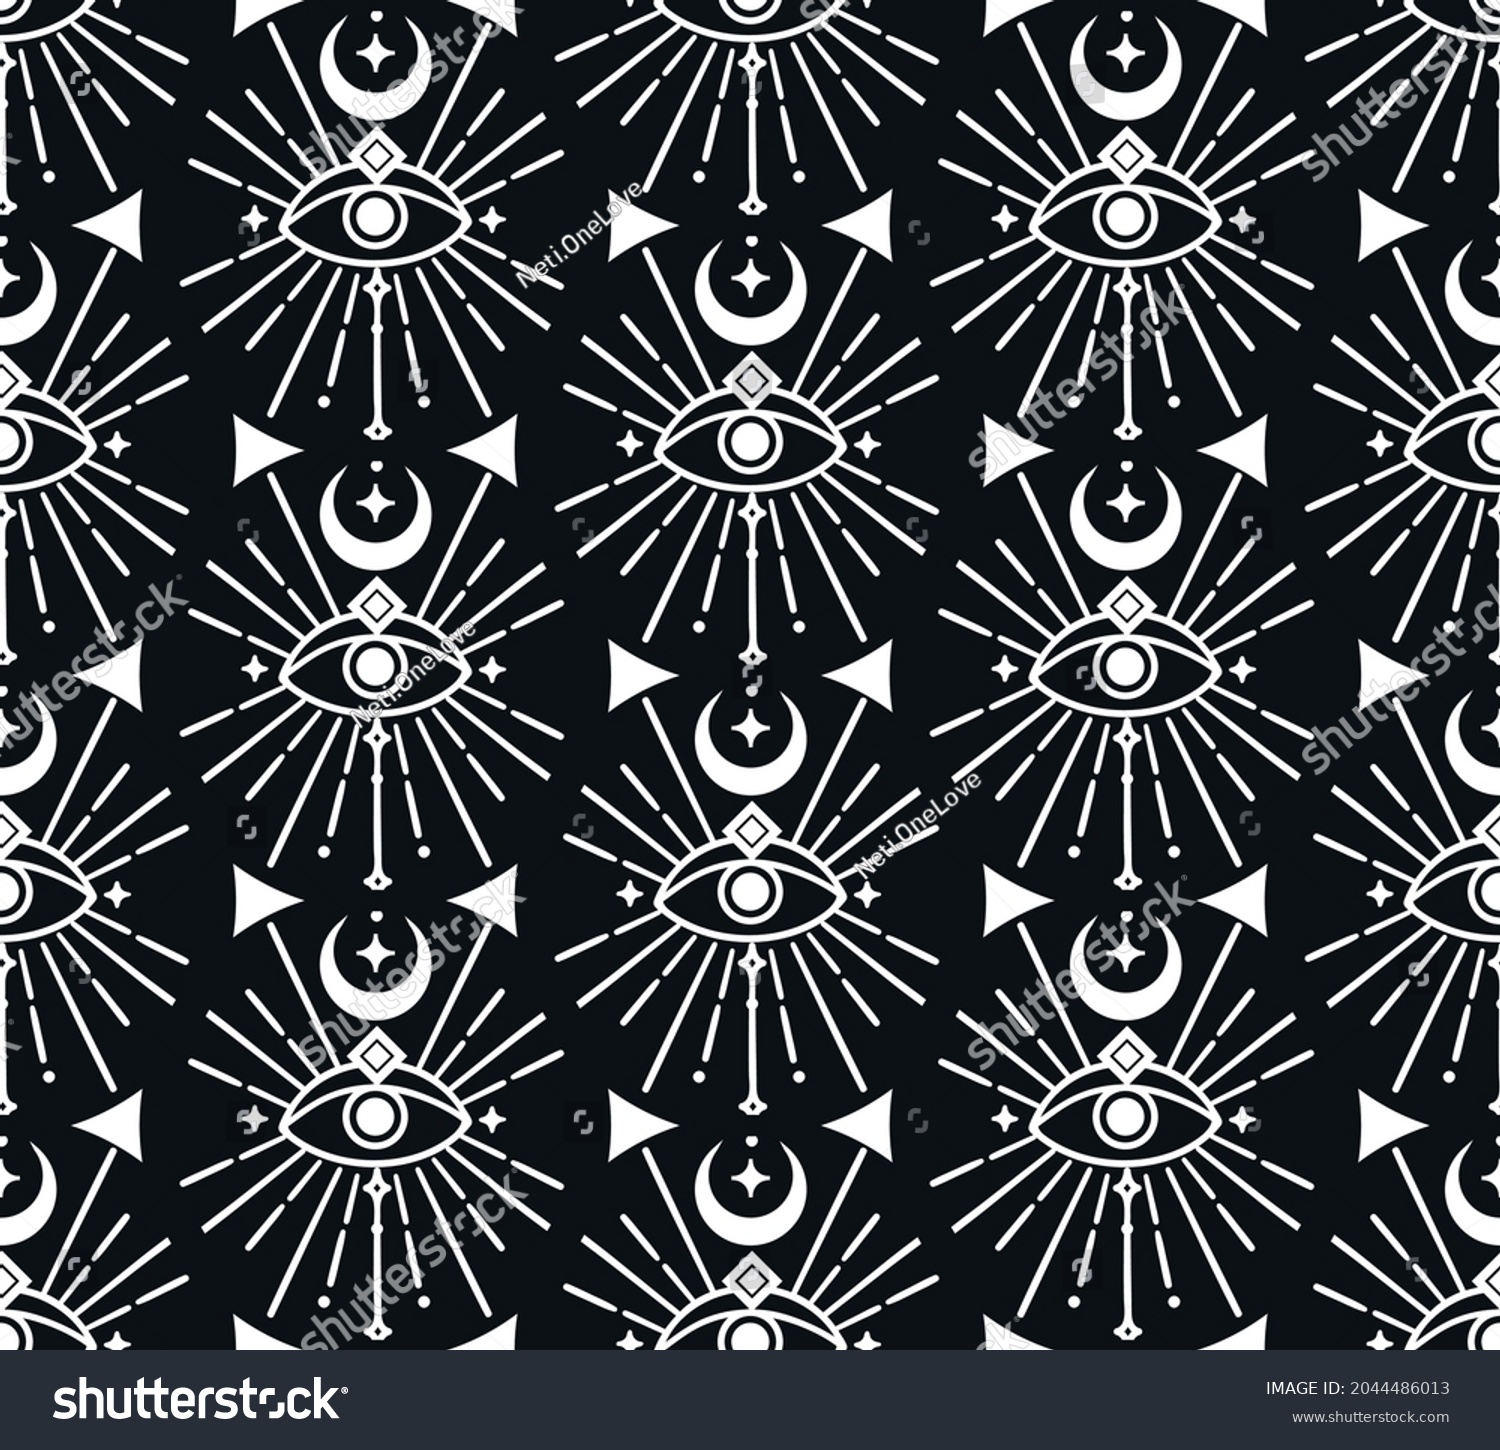 SVG of Abstract Background Seamless Pattern with Crescents, Eyes, squares. Mystic Design, Vector Illustration for wrapping tissue paper. svg